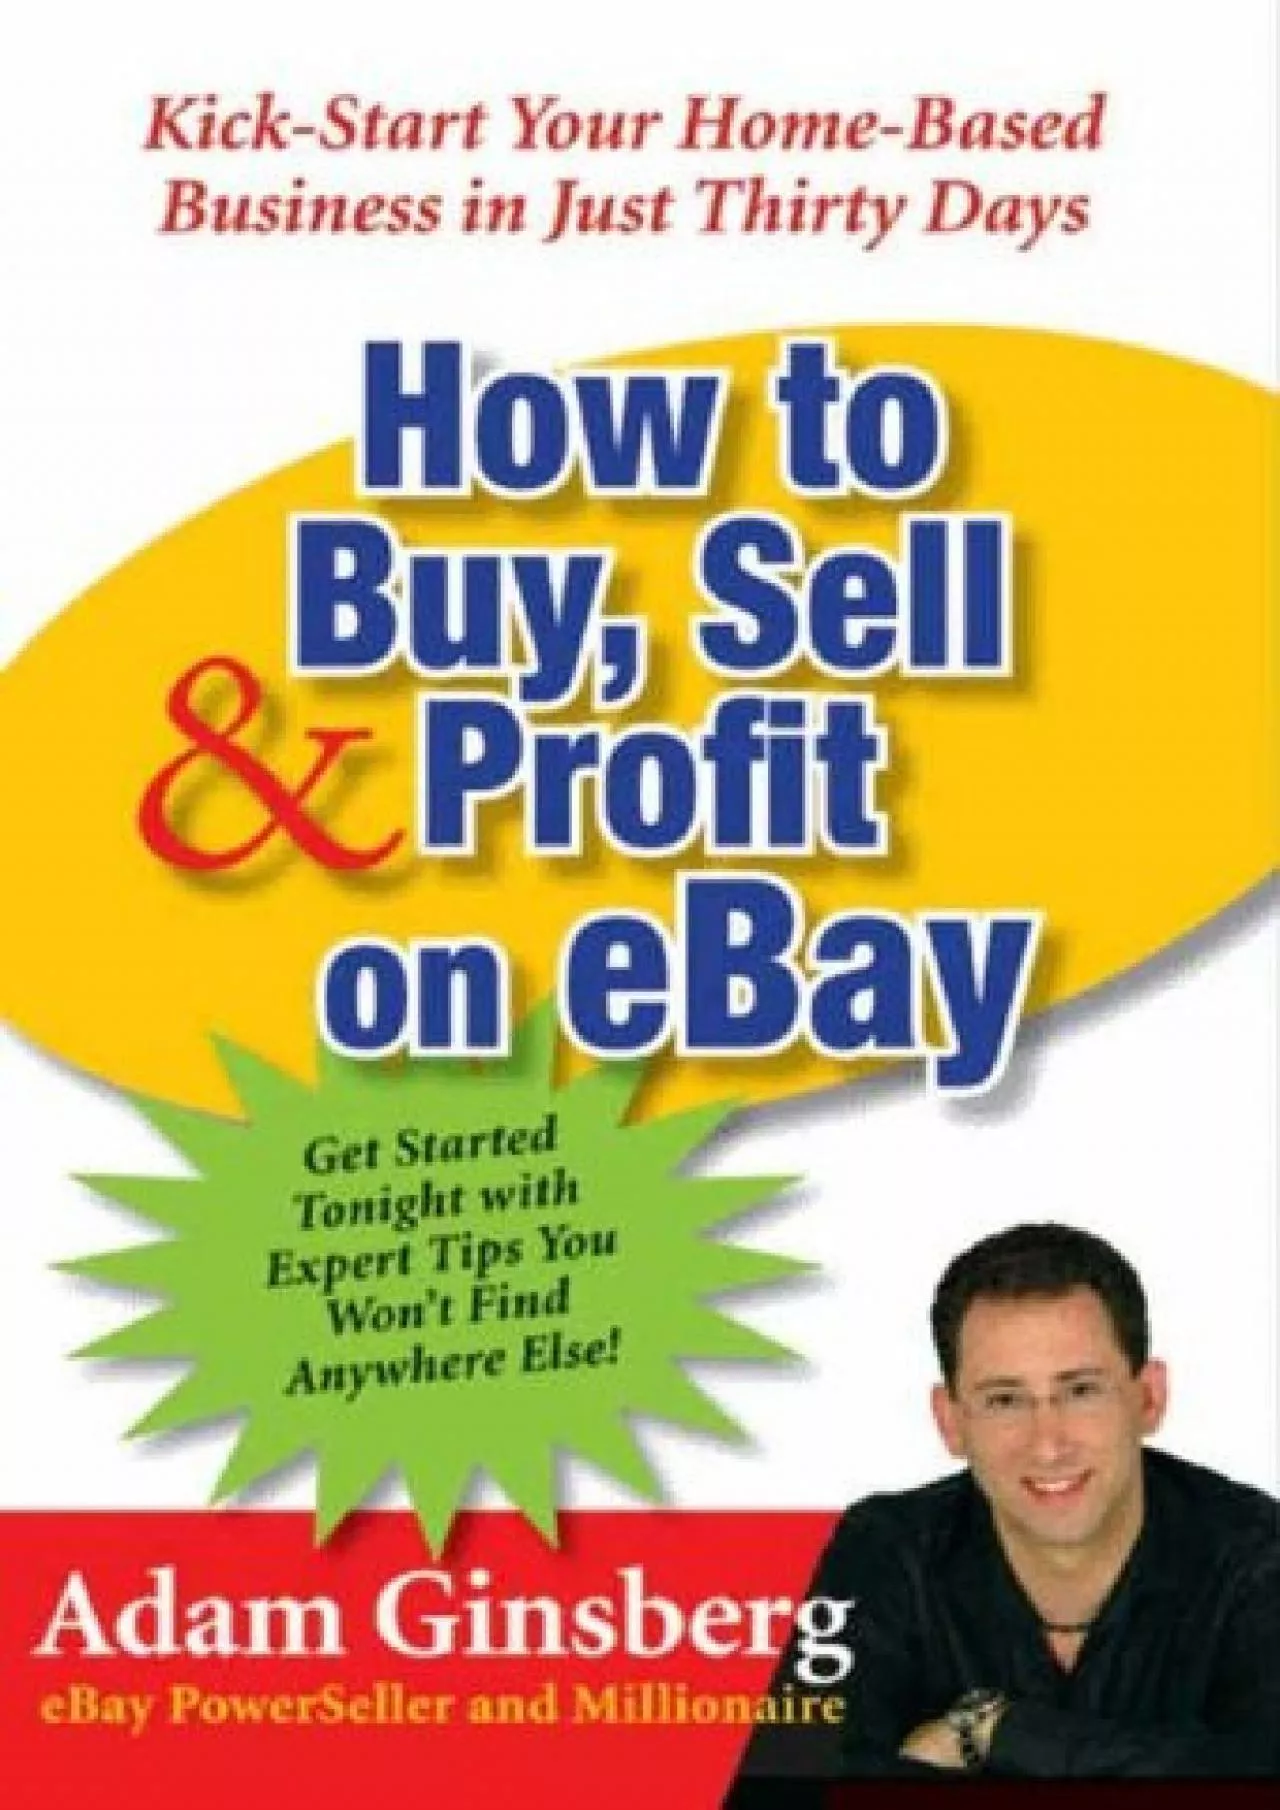 How to Buy, Sell, and Profit on eBay Kick-Start Your Home-Based Business in Just Thirty